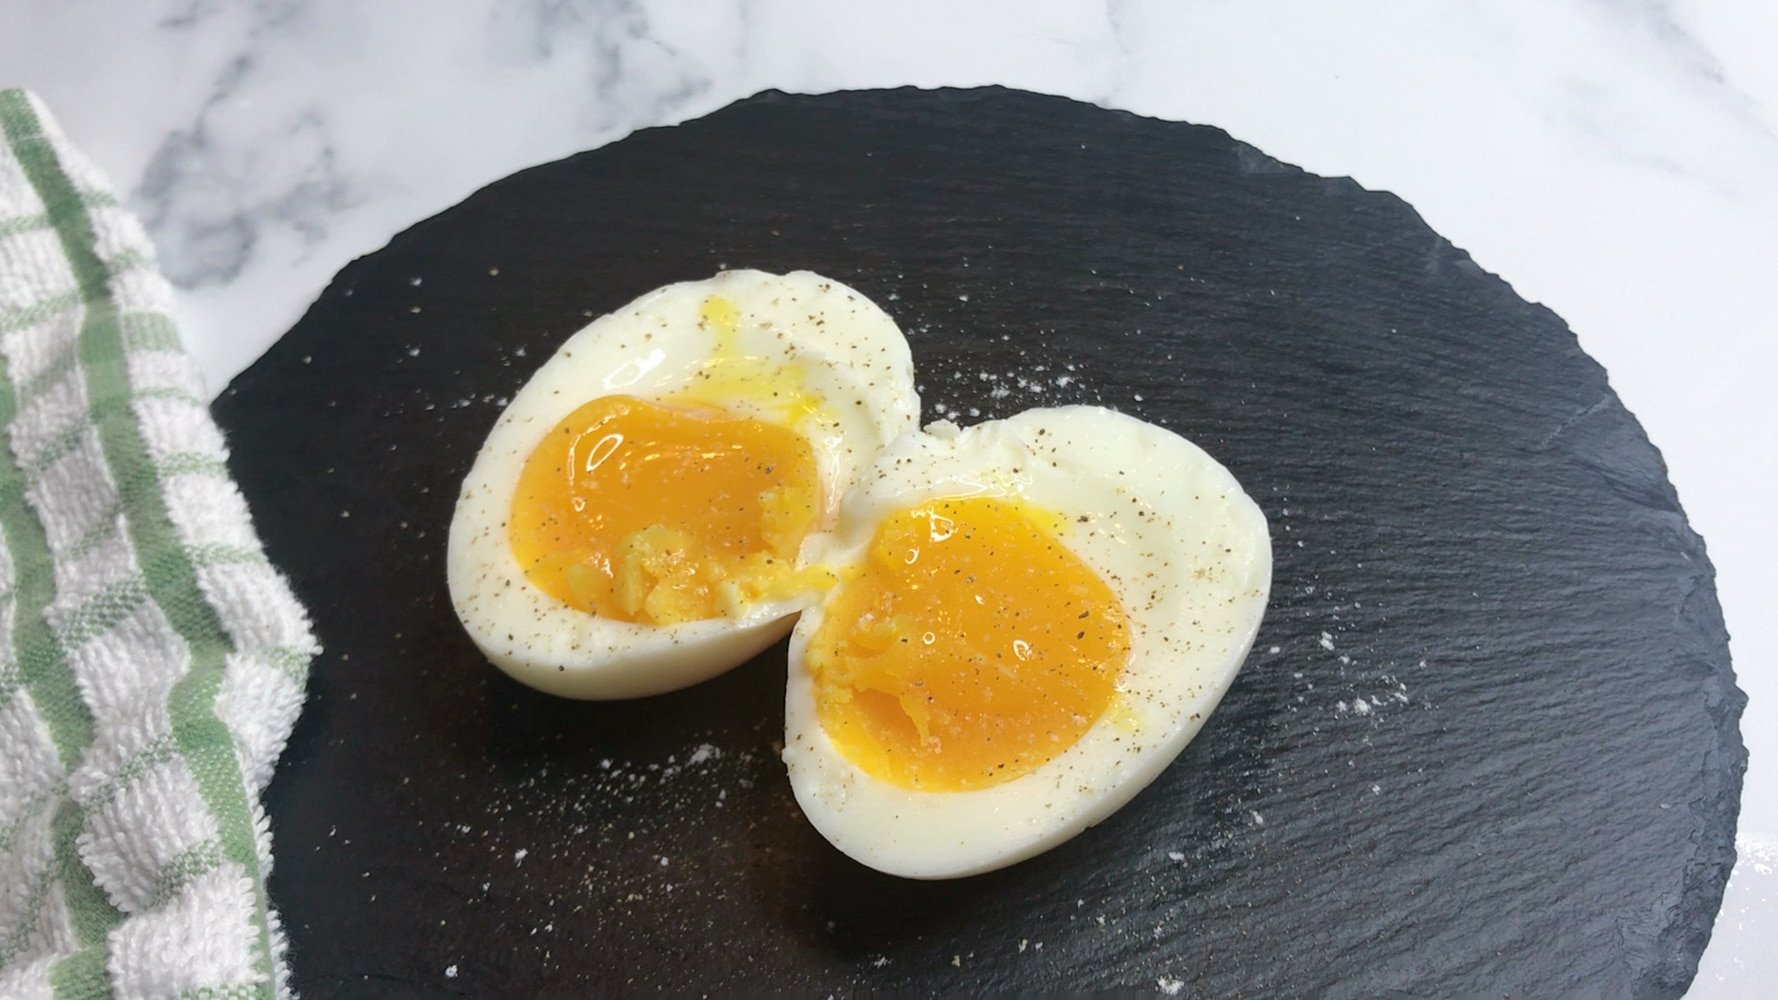 soft boiled sous vide egg cooked at the perfect time and temperature of 9 minutes